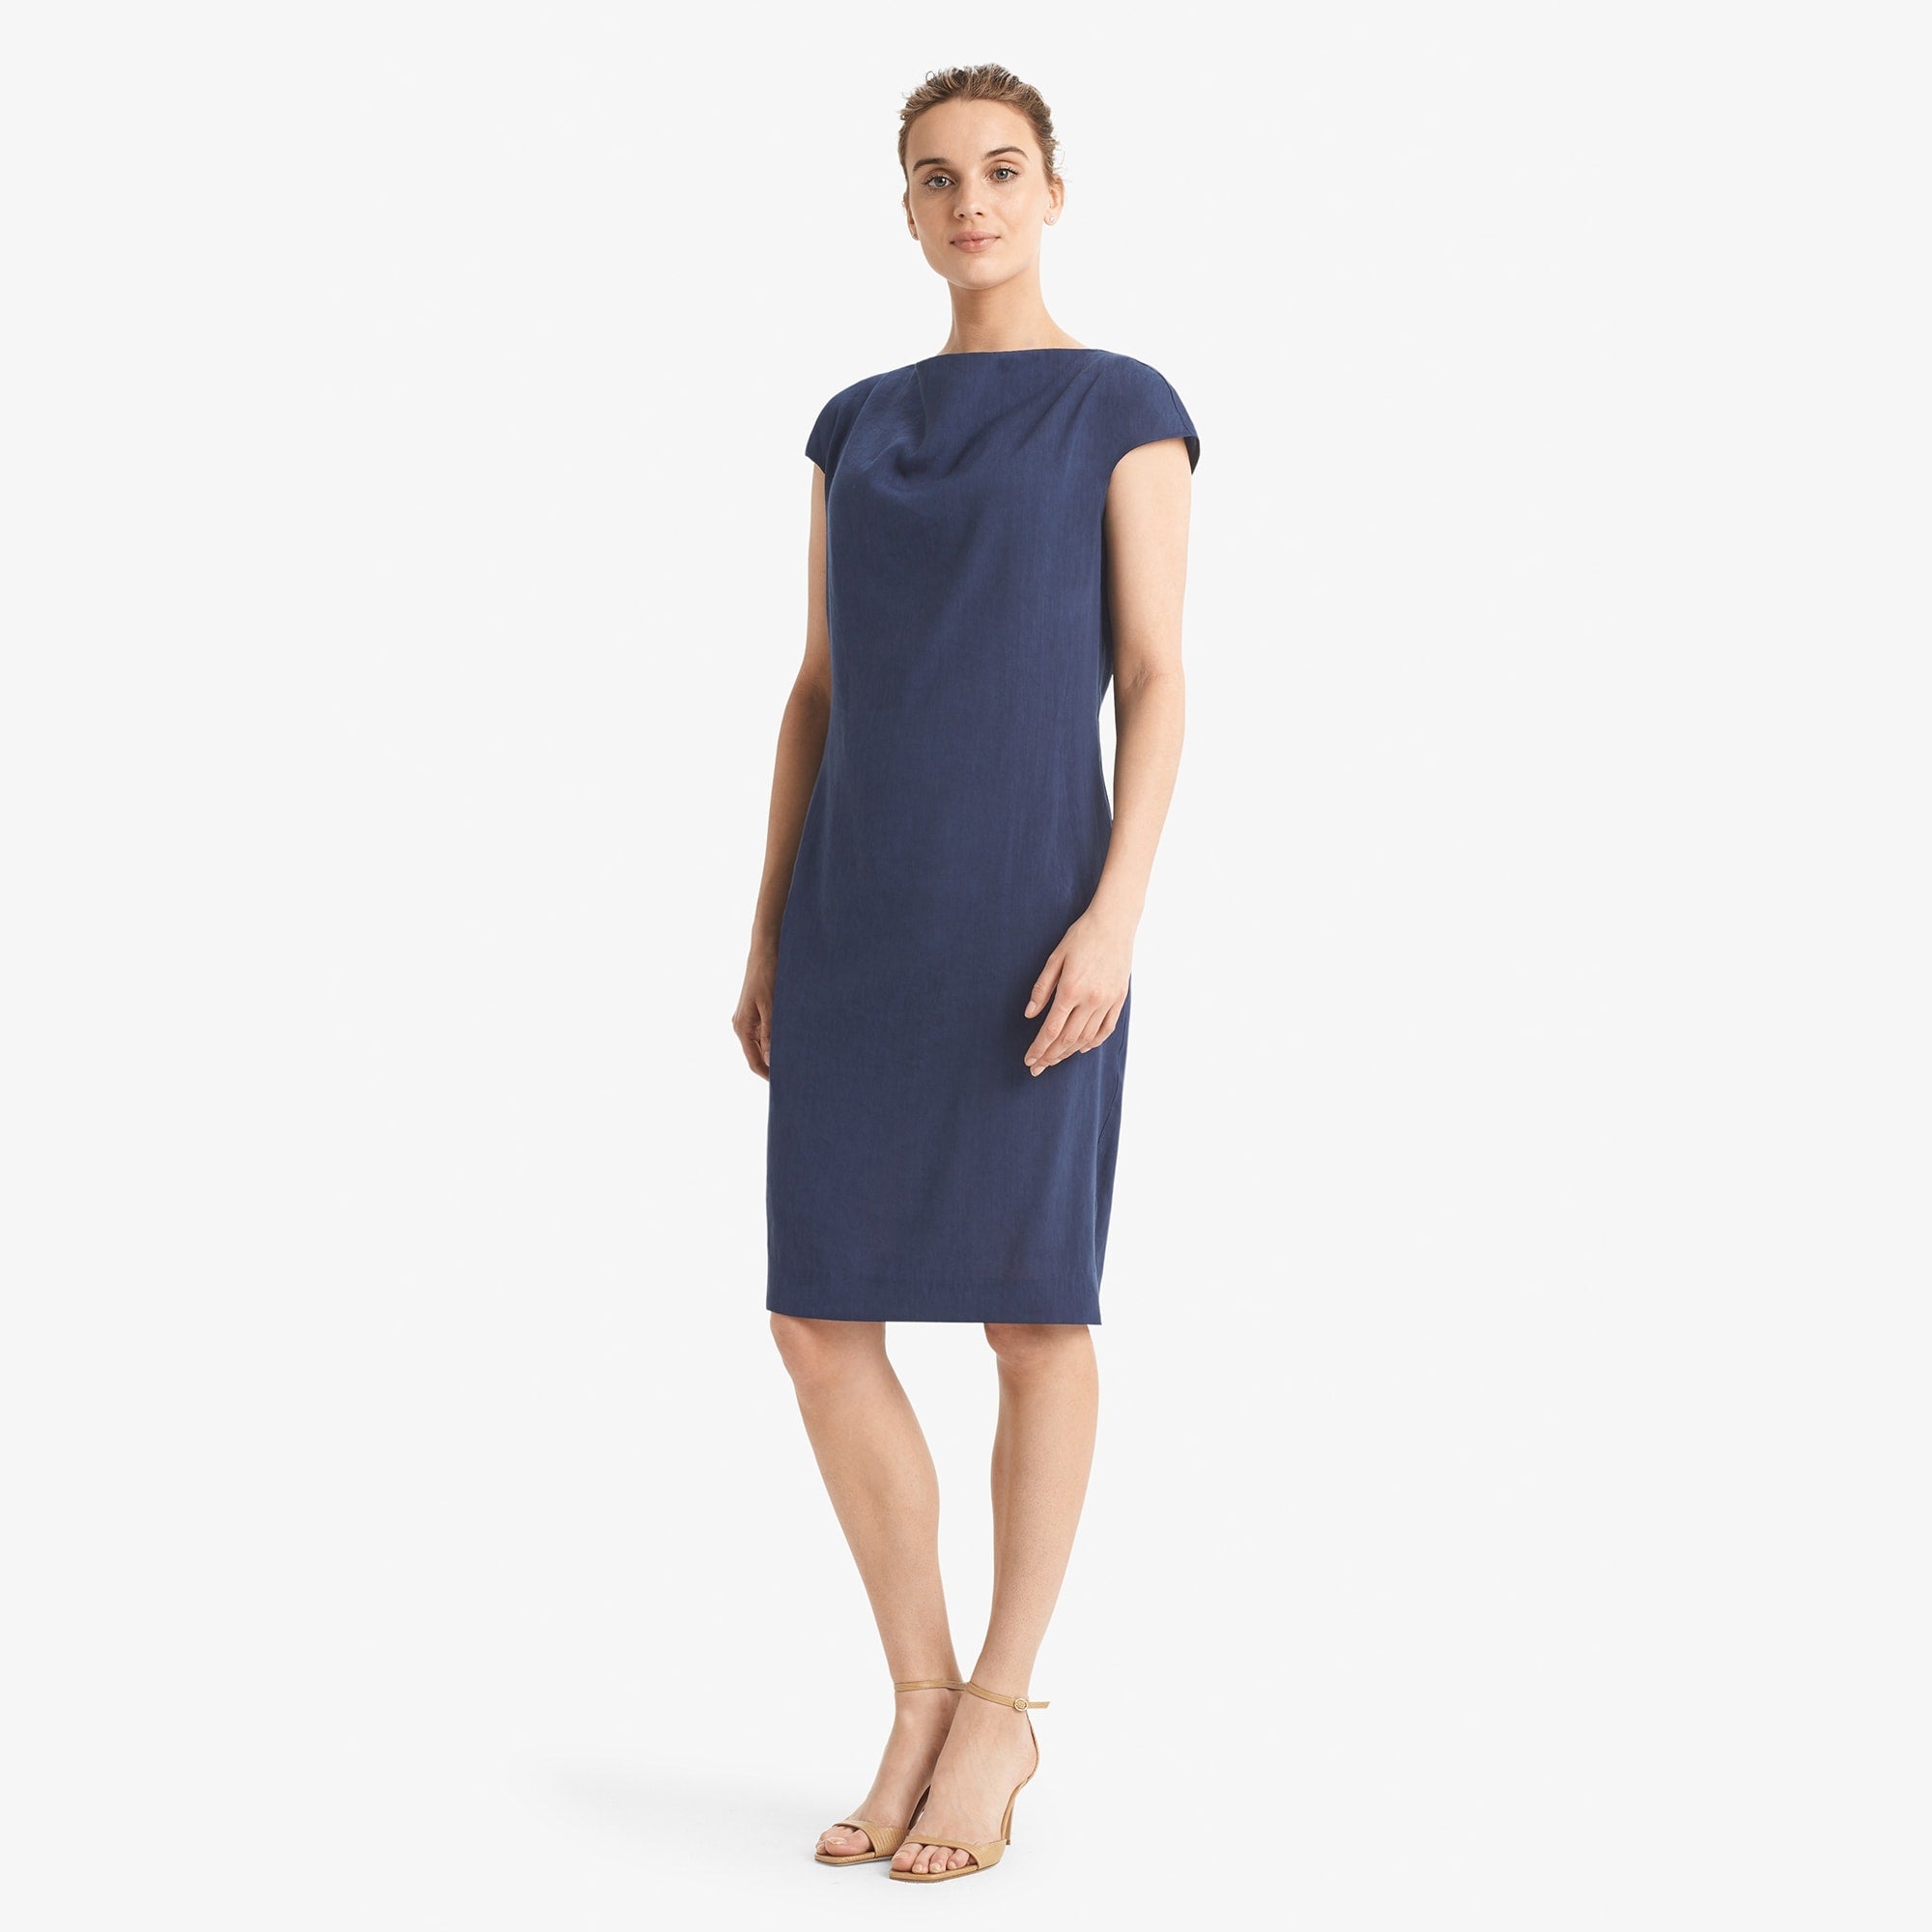 Side image of a woman standing wearing the Marilyn dress stretch linen in blueberry